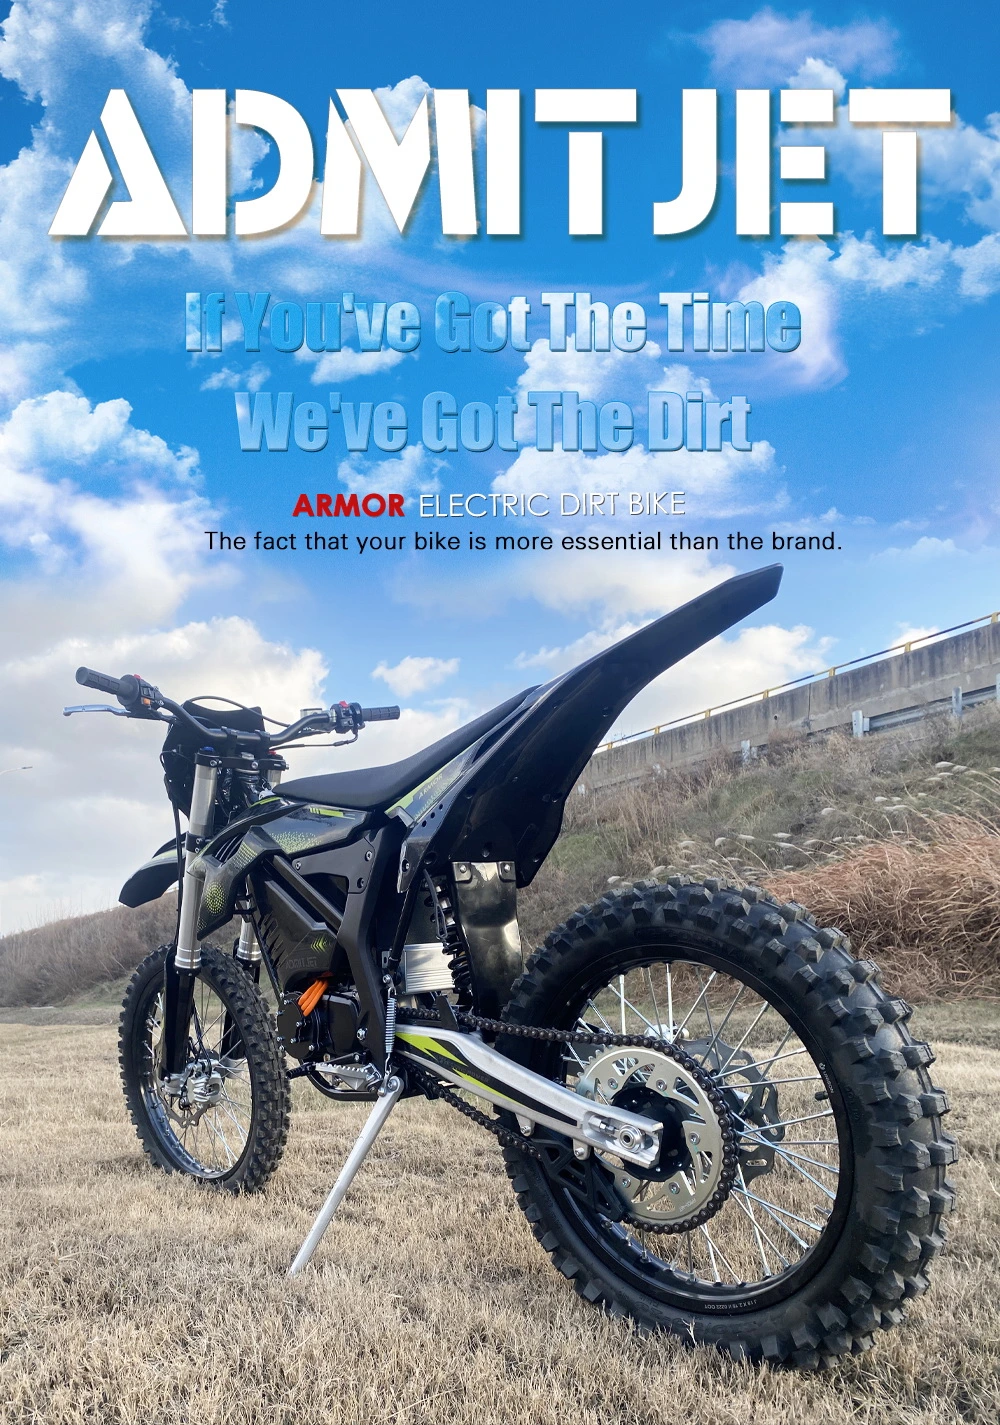 72V Max 20kw Continuous 12kw Electric Bicycle Motor Adult off Road Street Legal EEC Dirtbike Cross Country Tour Electric Dirt Bike